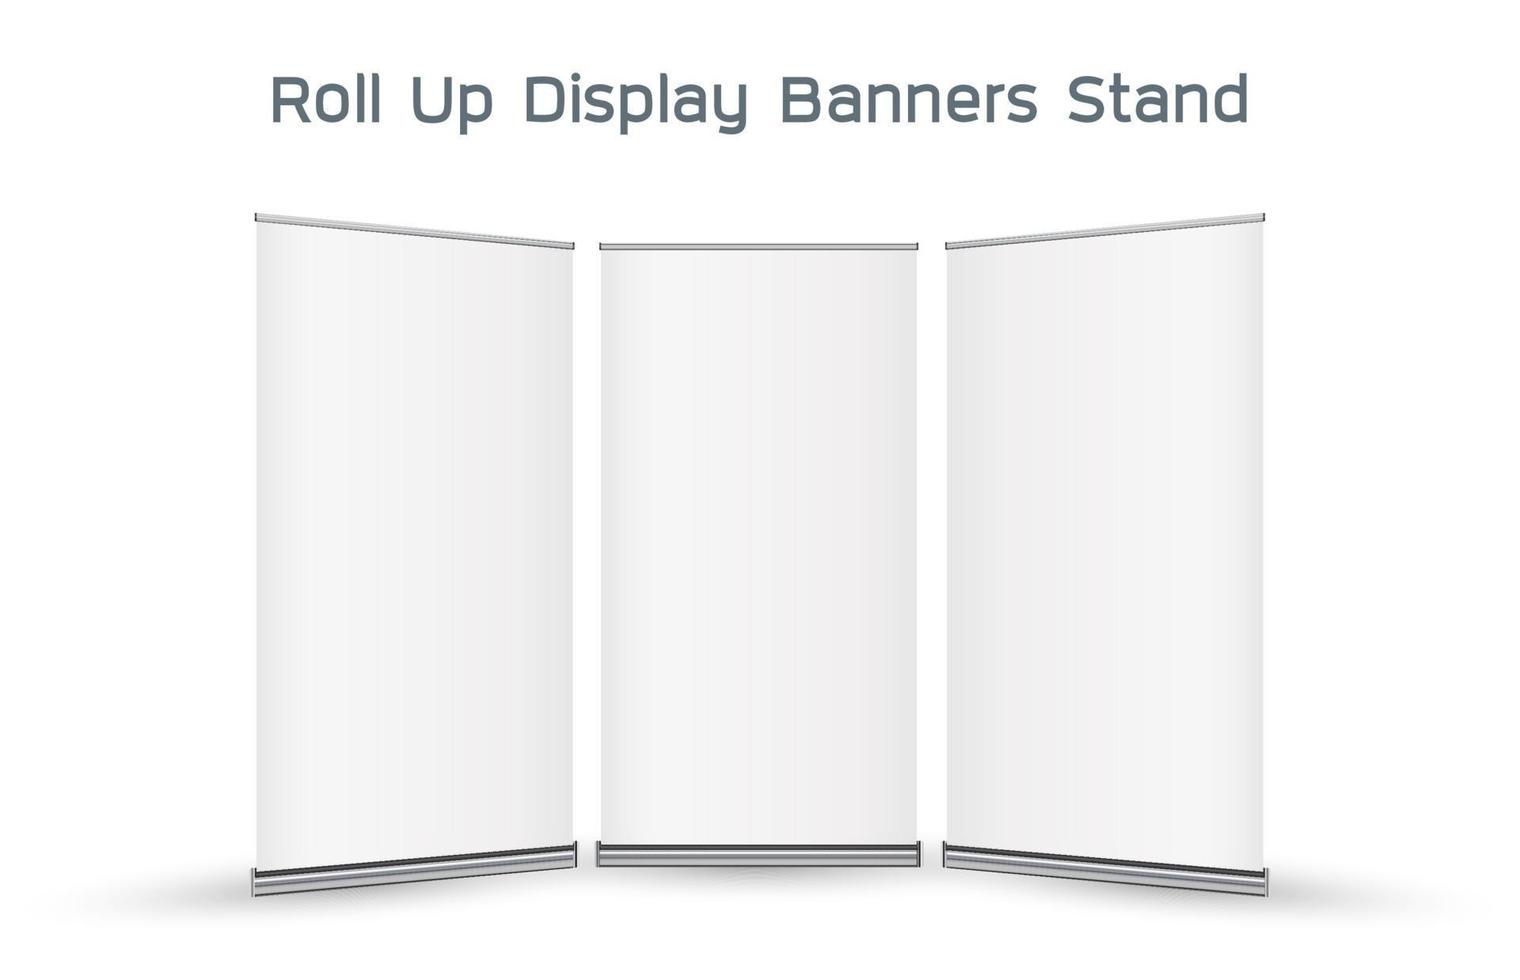 stand di banner display roll up 3d reale vettore